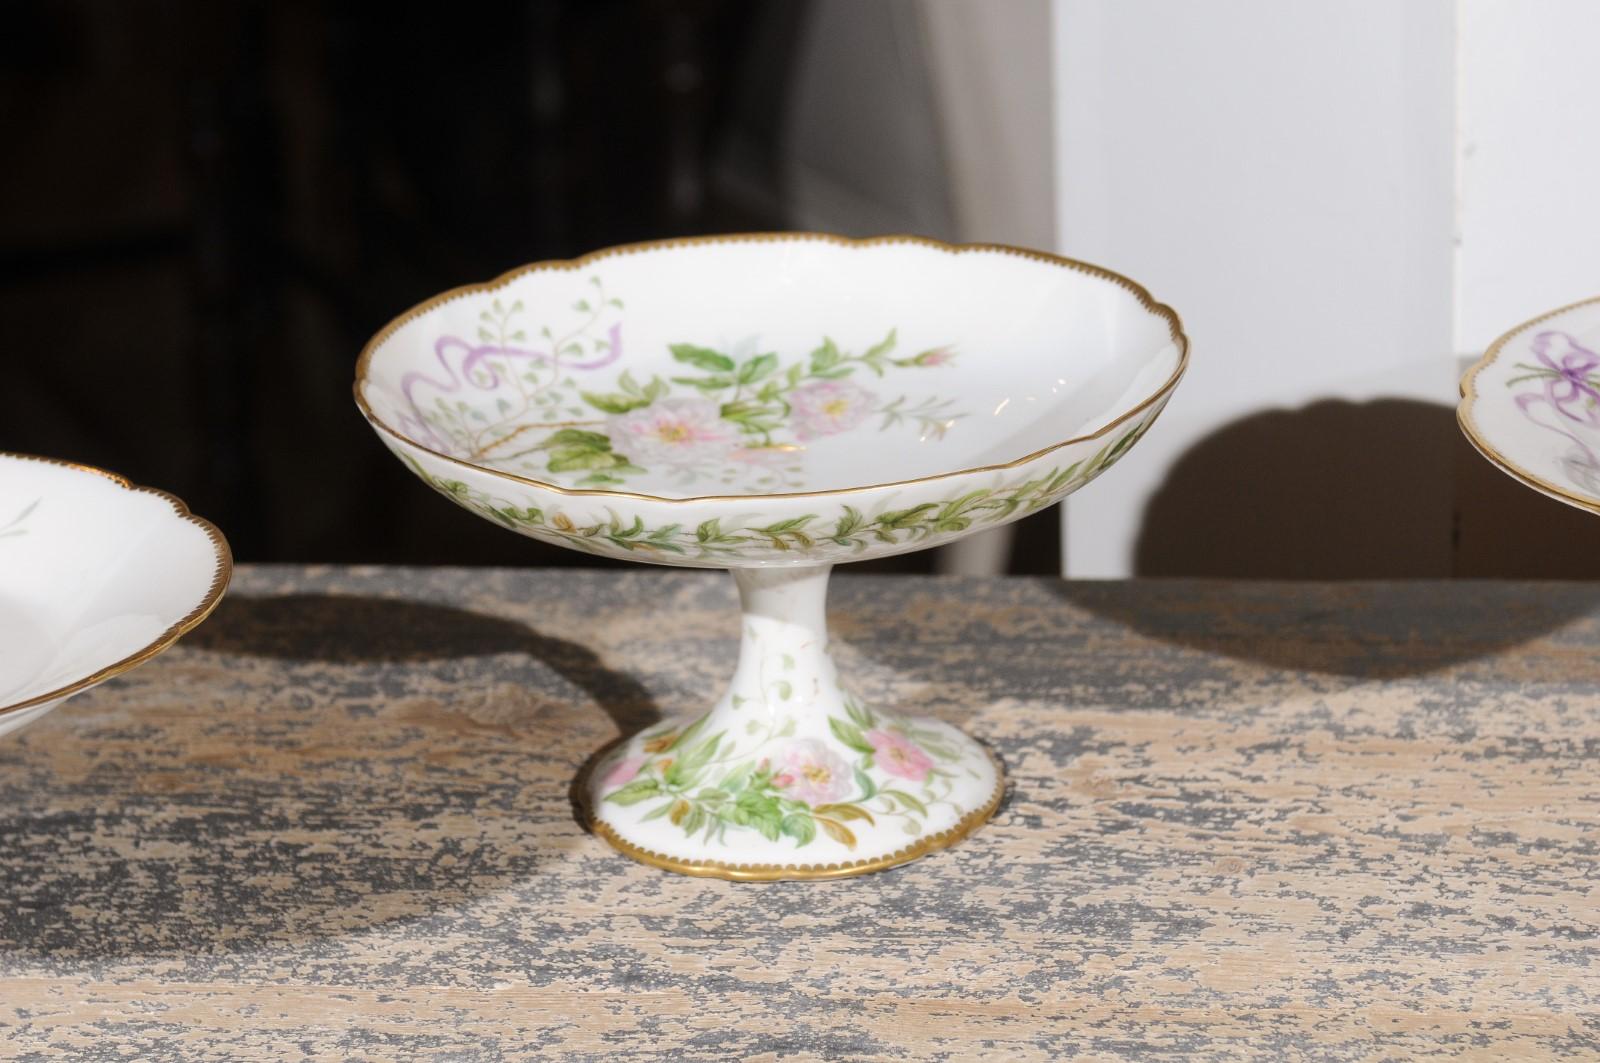 20th Century English Porcelain Compote with Pink Flowers, Purple Ribbons and Gilt Trim